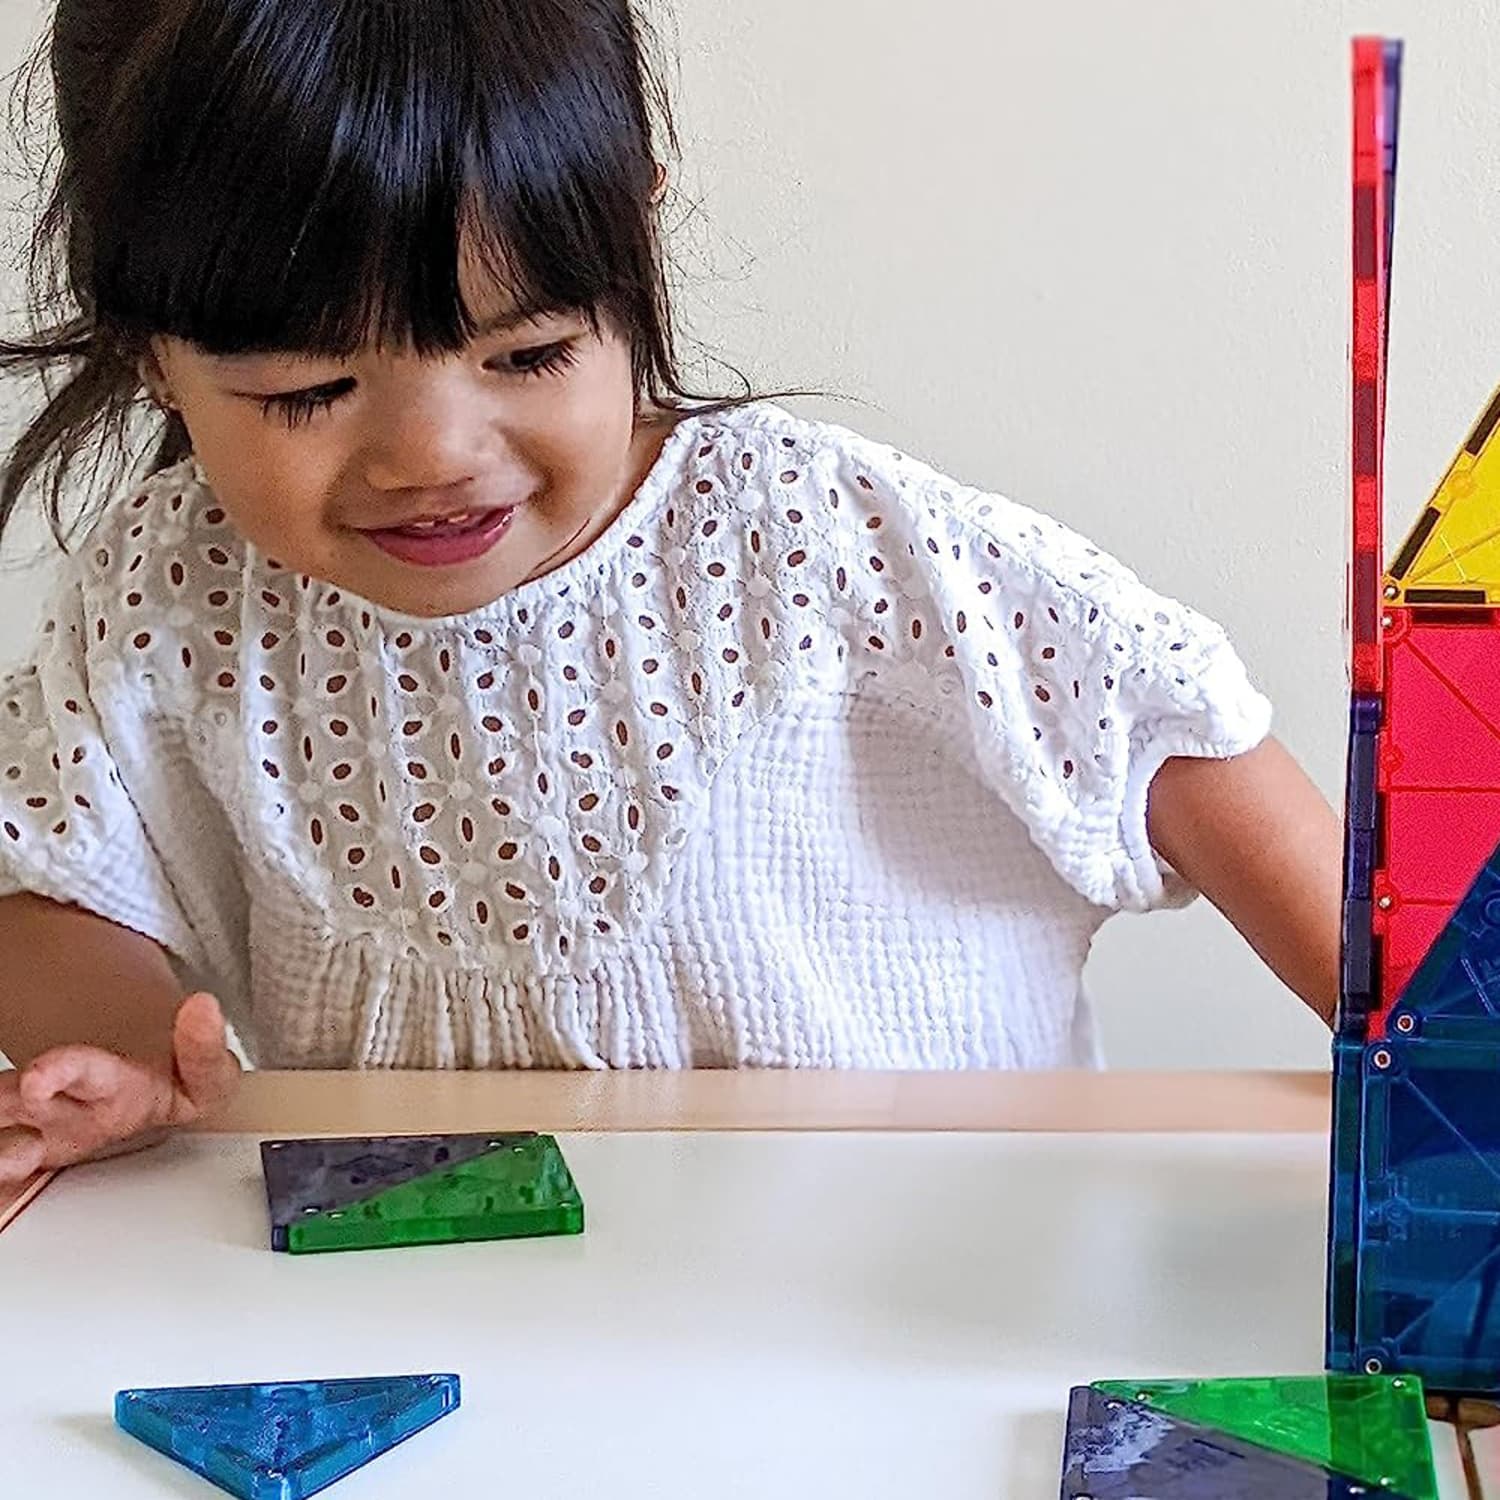 This Kid-Loved Magna-Tiles Set Is 30% Off for Prime Day